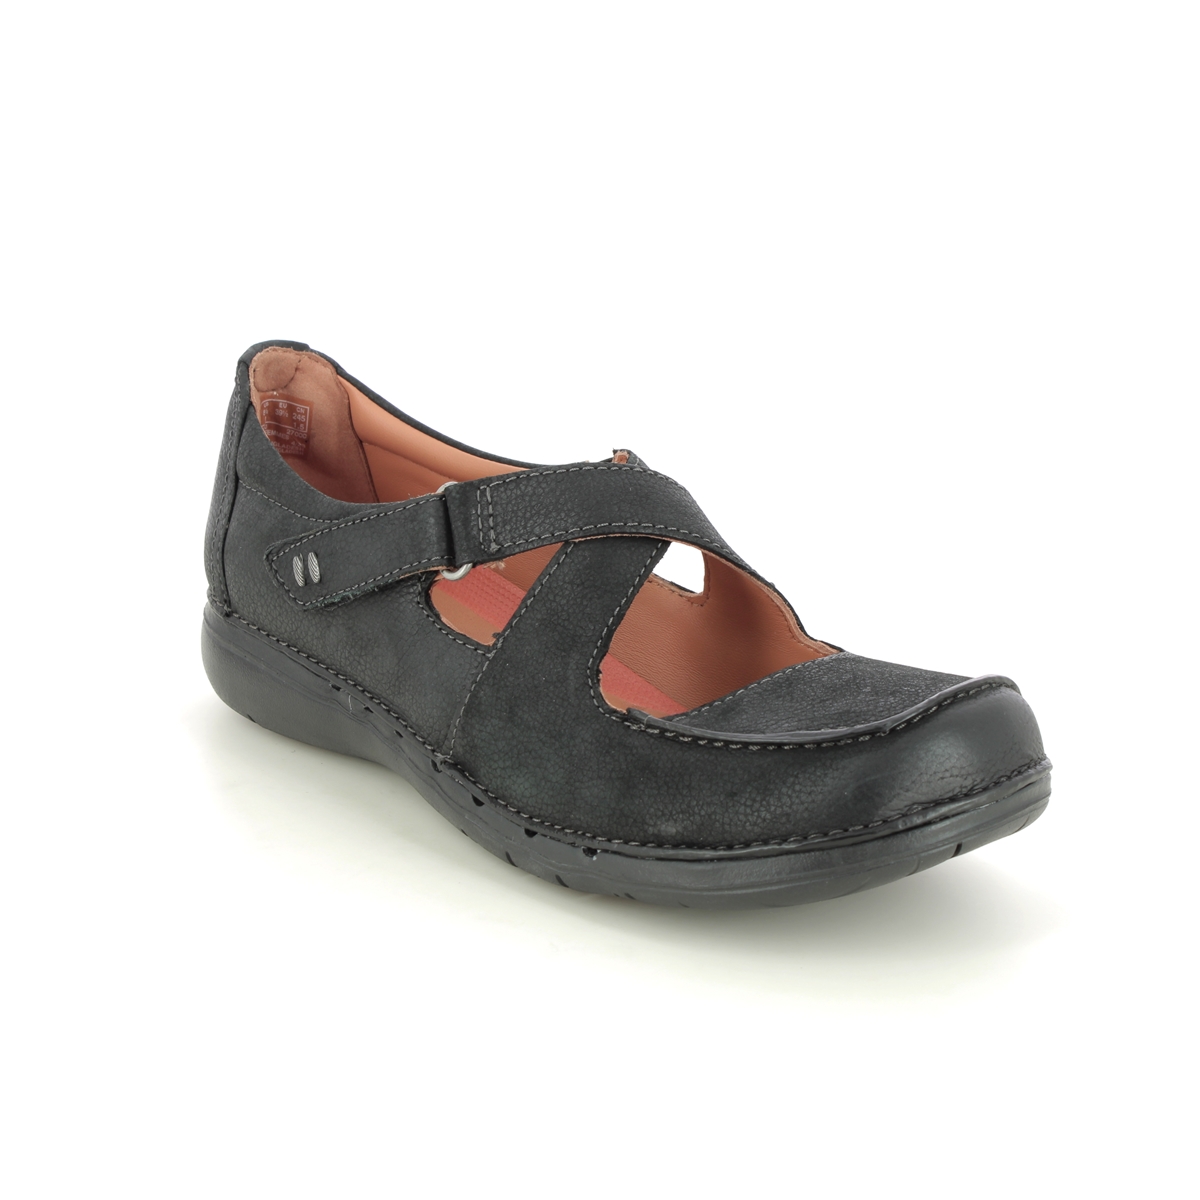 Clarks Un Loop Strap Black leather Womens Mary Jane Shoes 7497-04D in a Plain Leather in Size 7